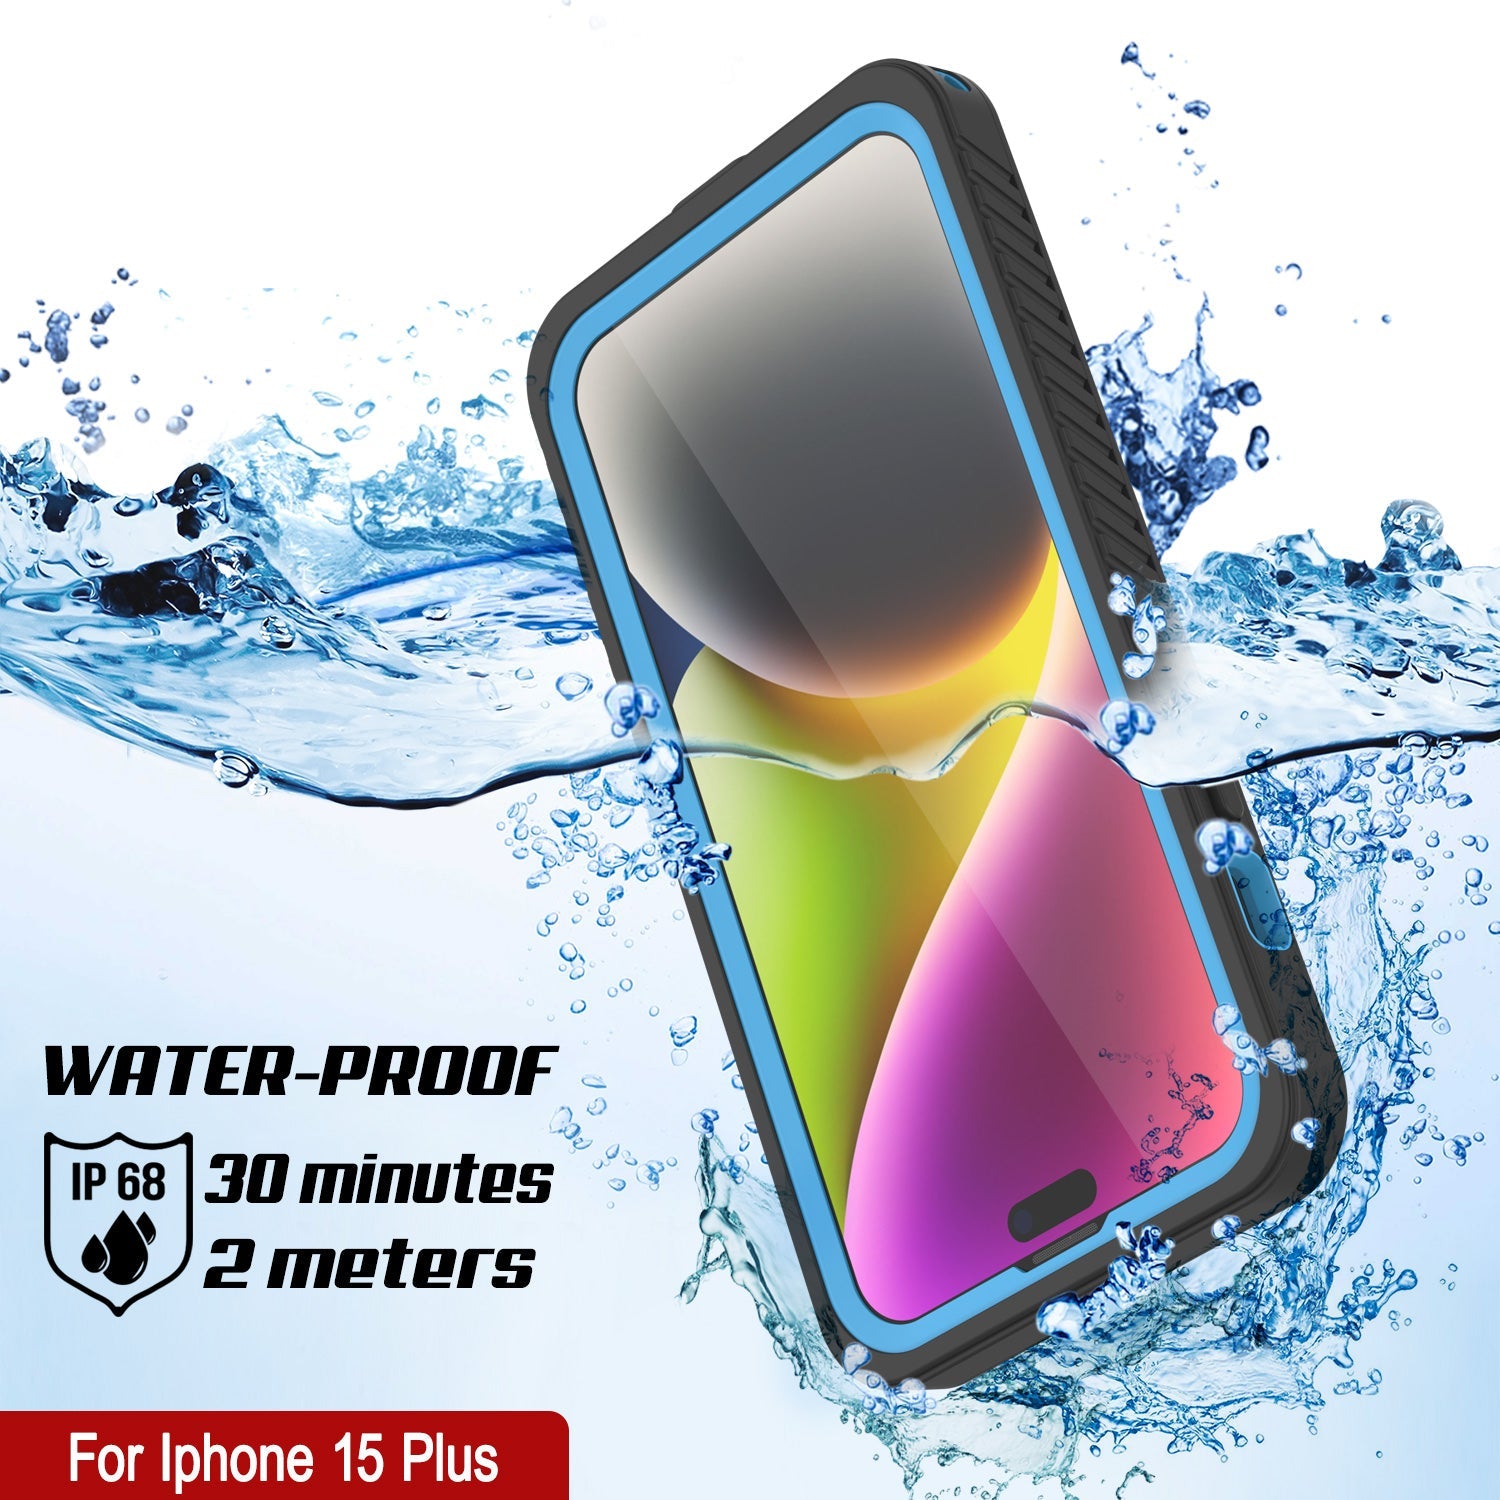 iPhone 15 Plus Waterproof Case, Punkcase [Extreme Series] Armor Cover W/ Built In Screen Protector [Light Blue]